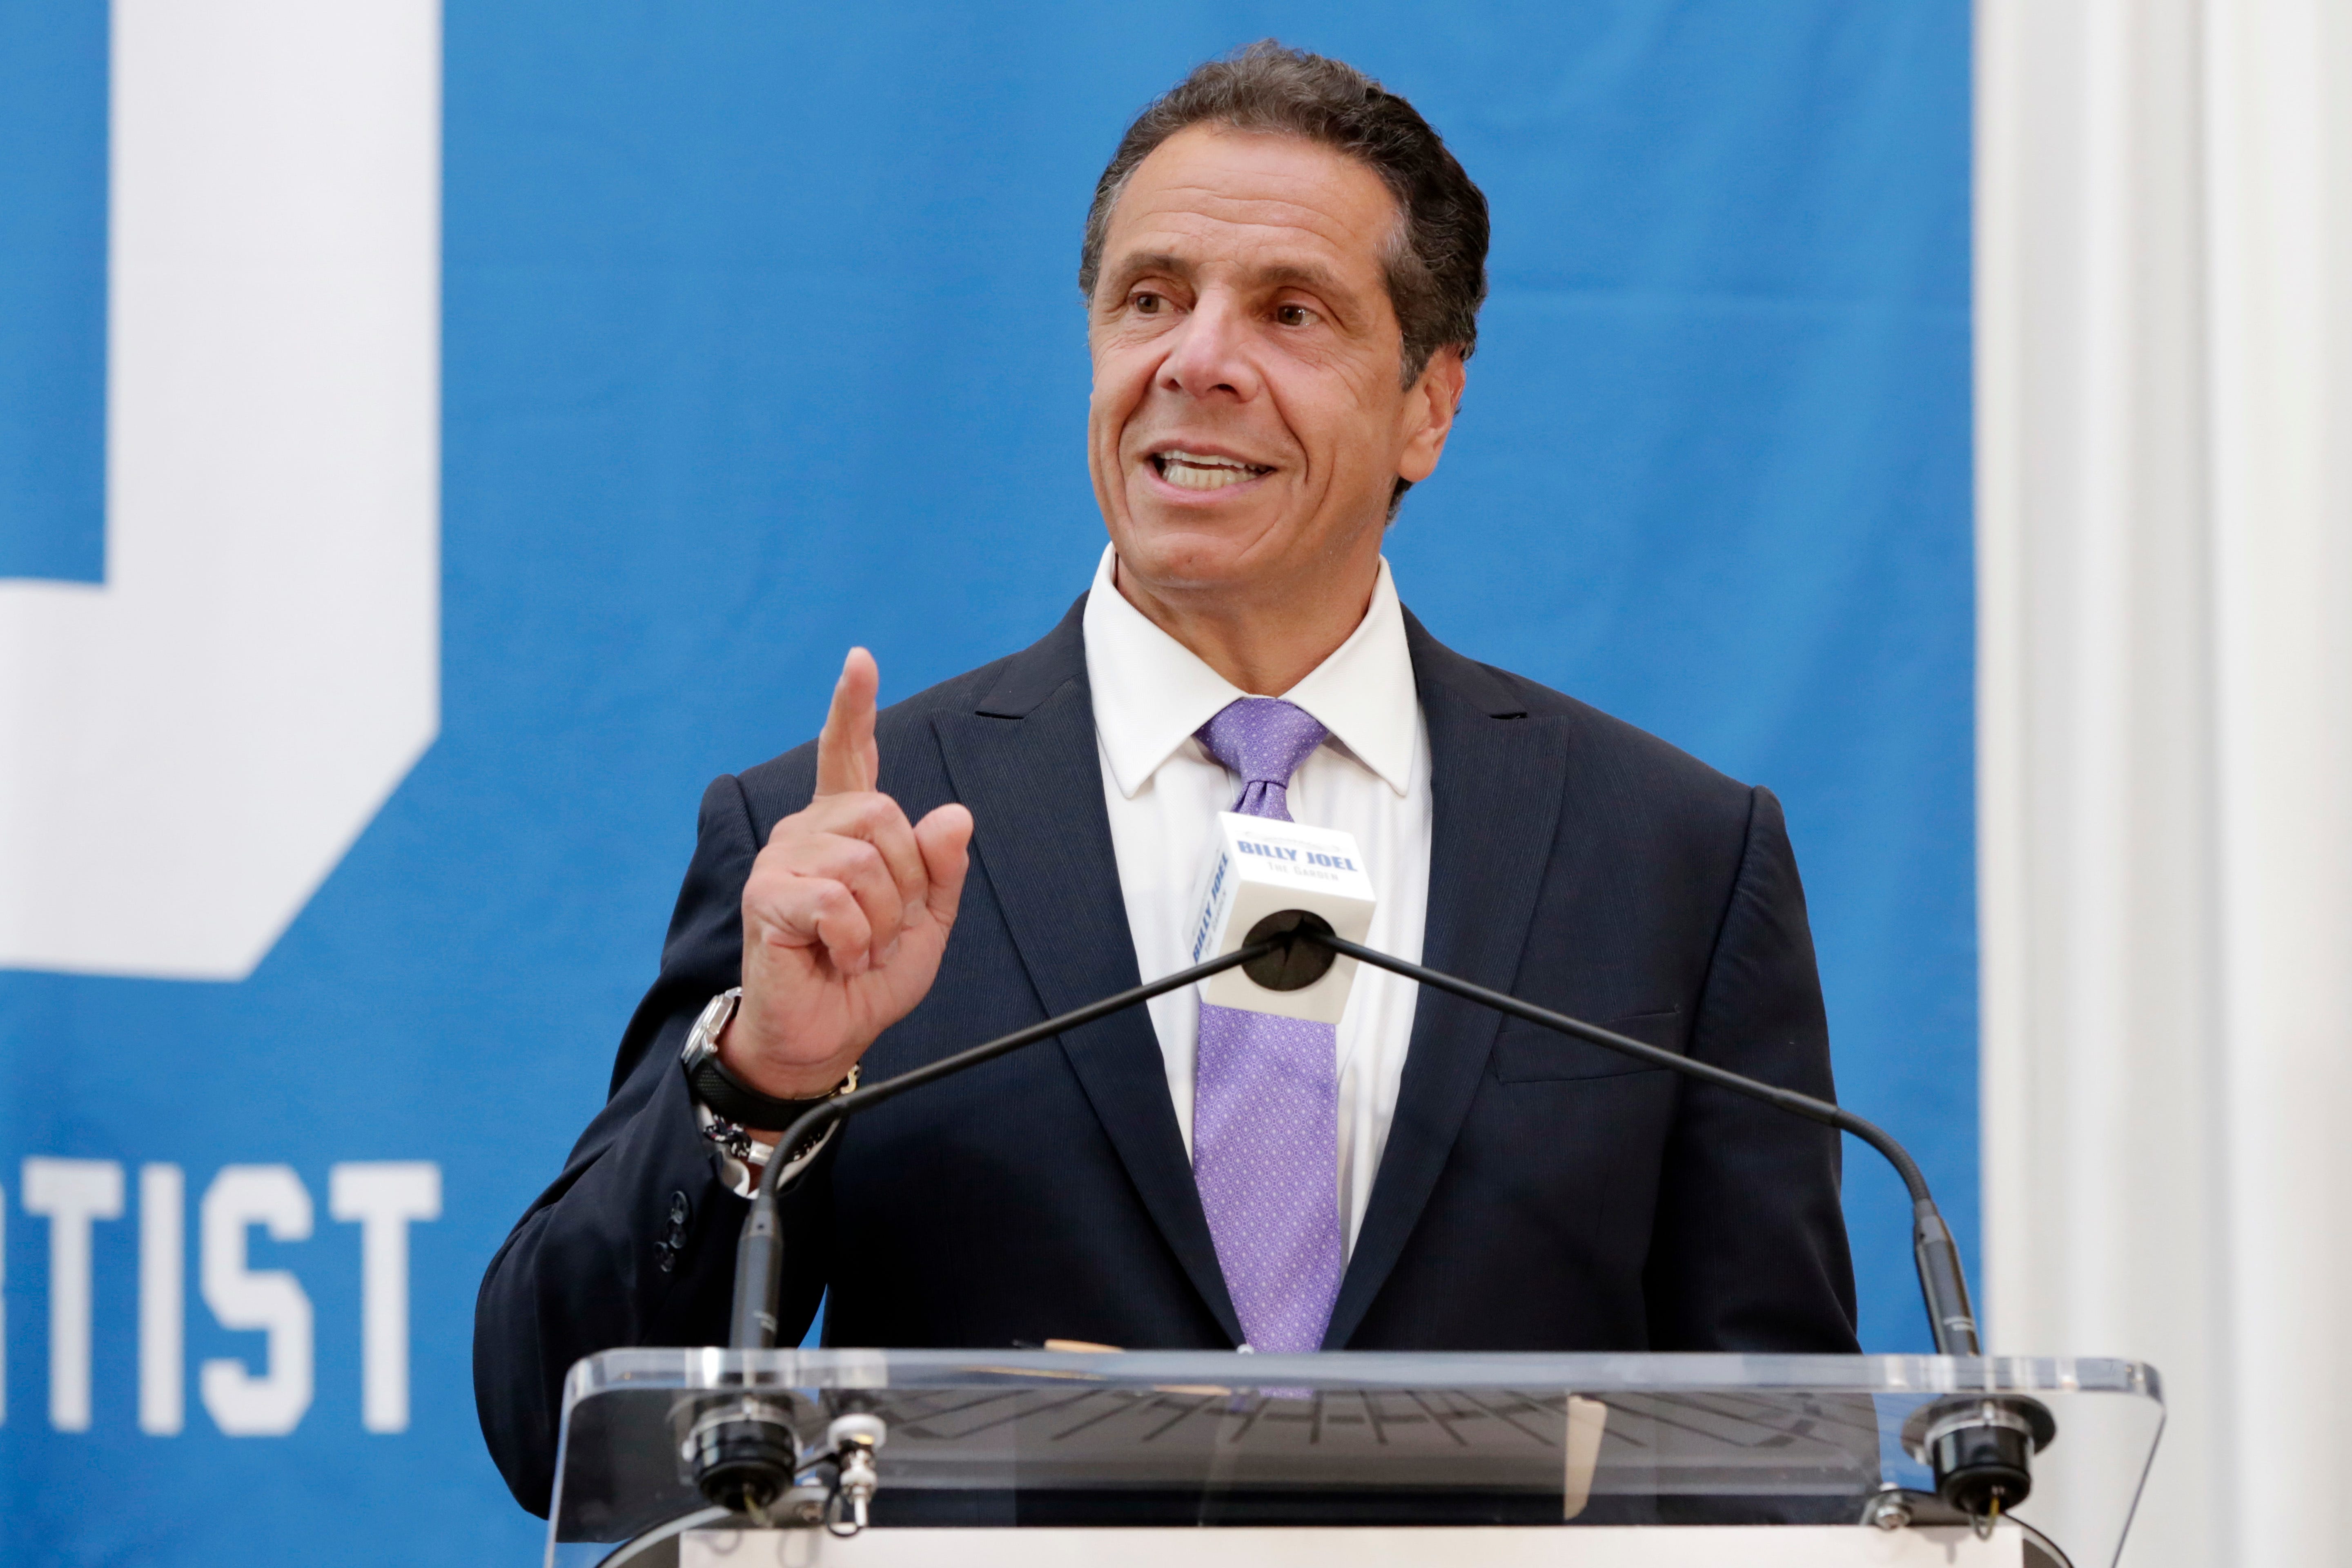 Timeline: How the Andrew Cuomo, Donald Trump battle came to be